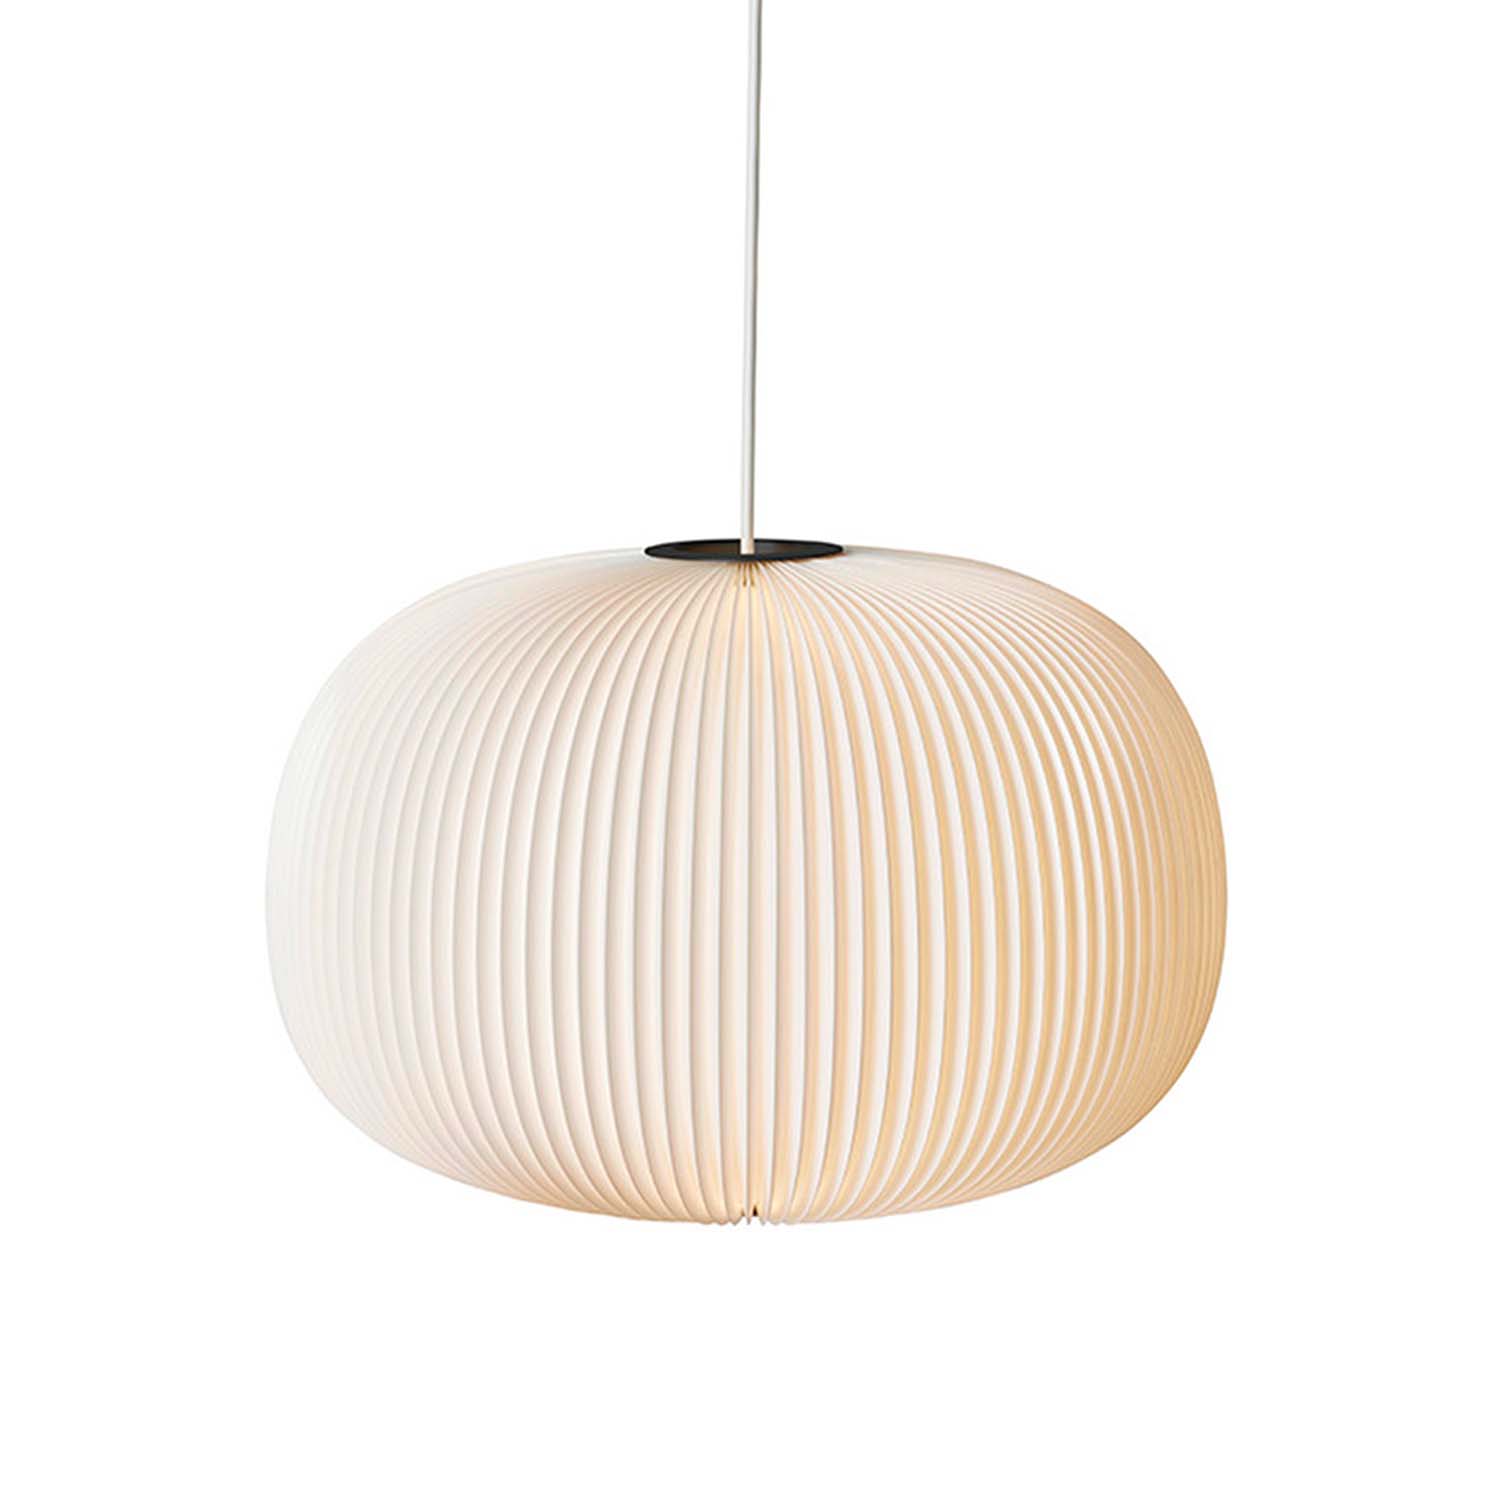 LAMELLA 1 - Pendant light made by hand in white pleated paper